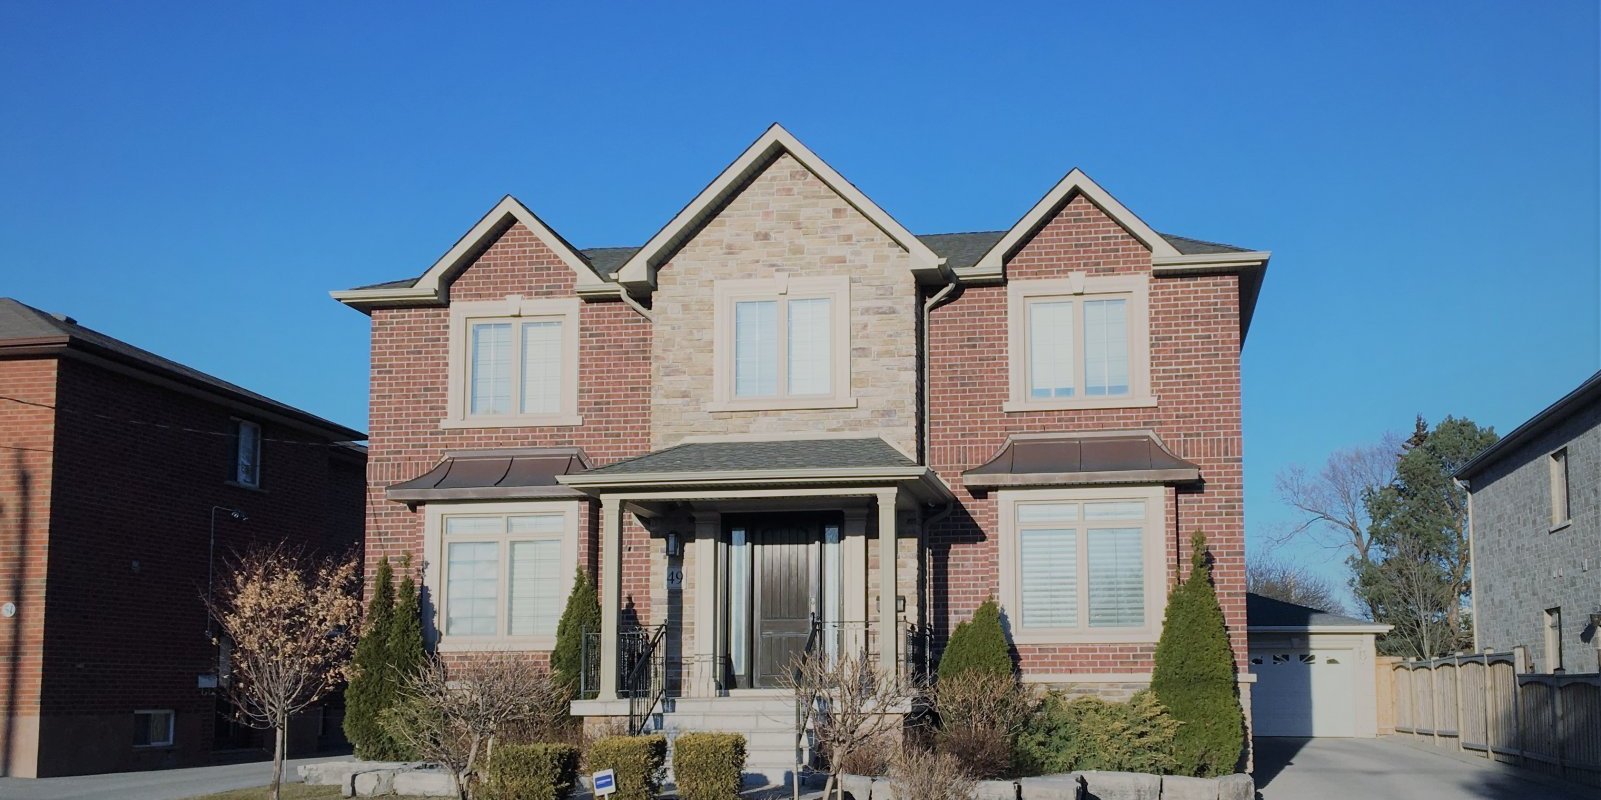 Sell My House Fast in Bowmanville